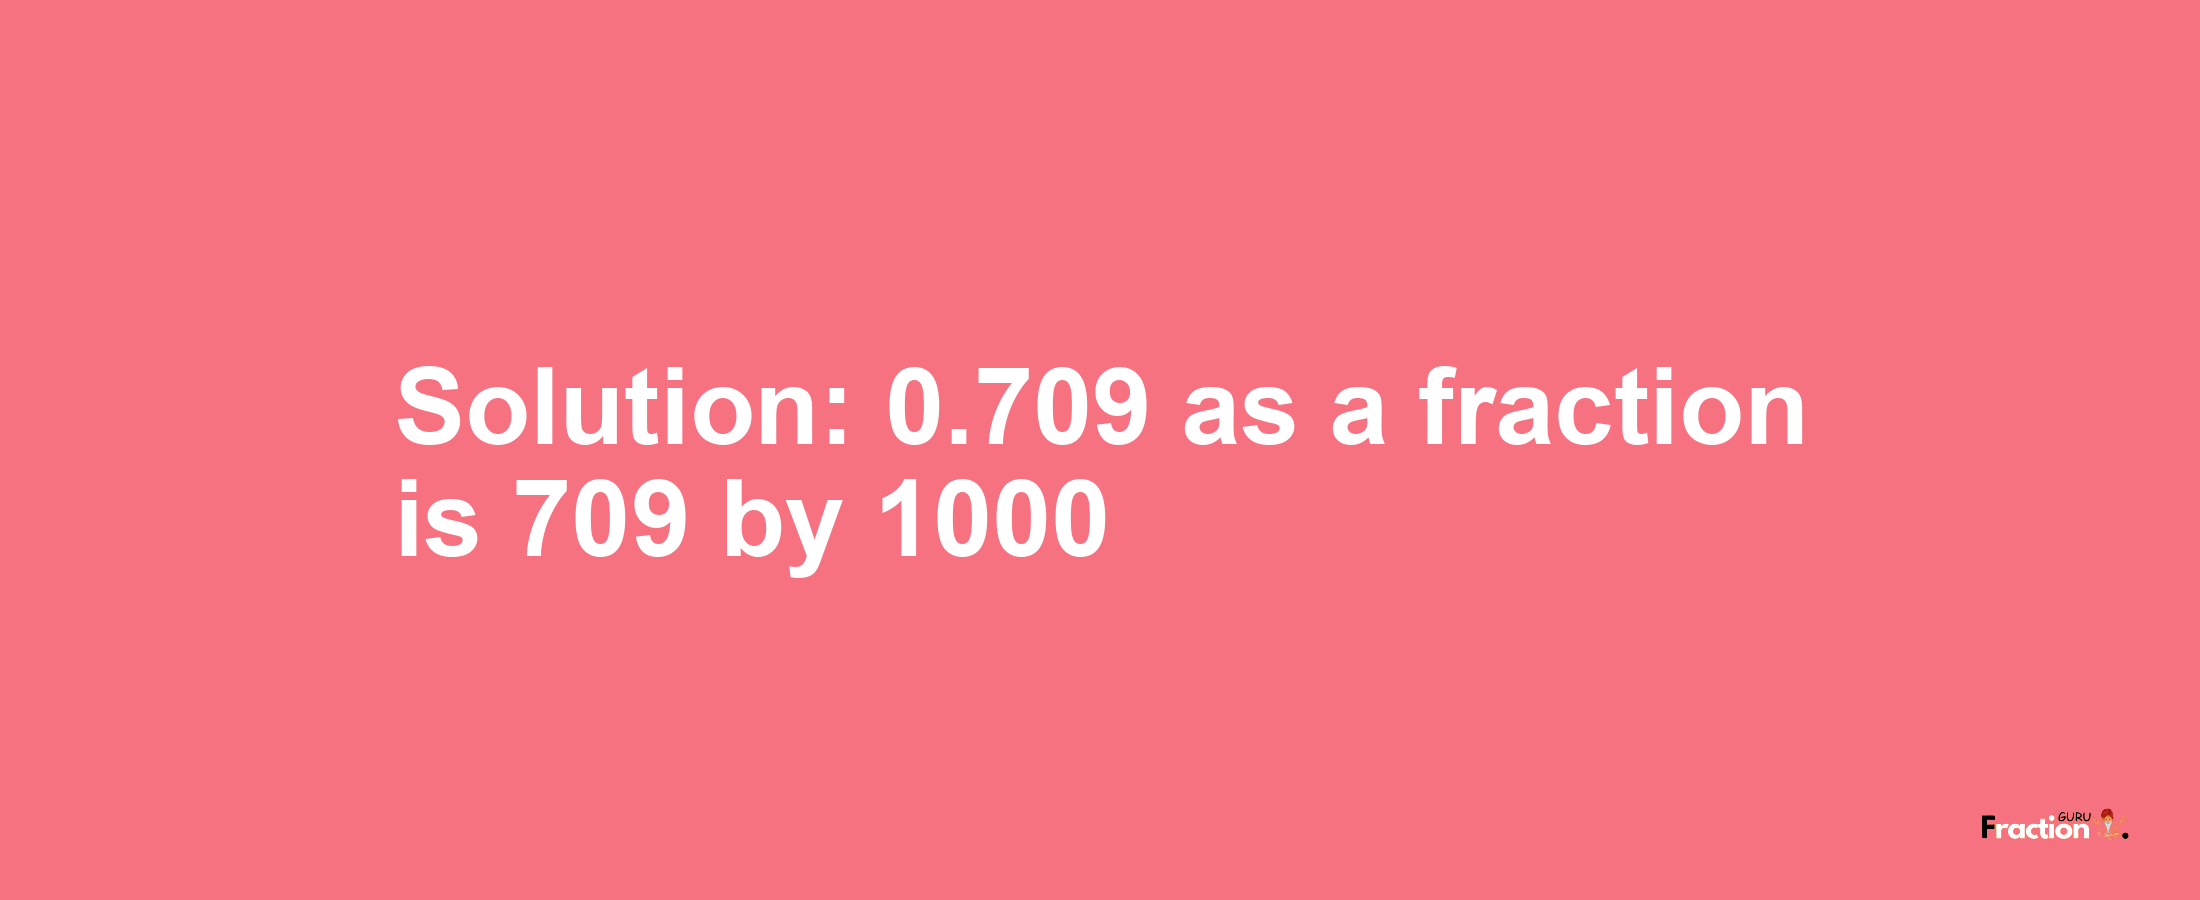 Solution:0.709 as a fraction is 709/1000